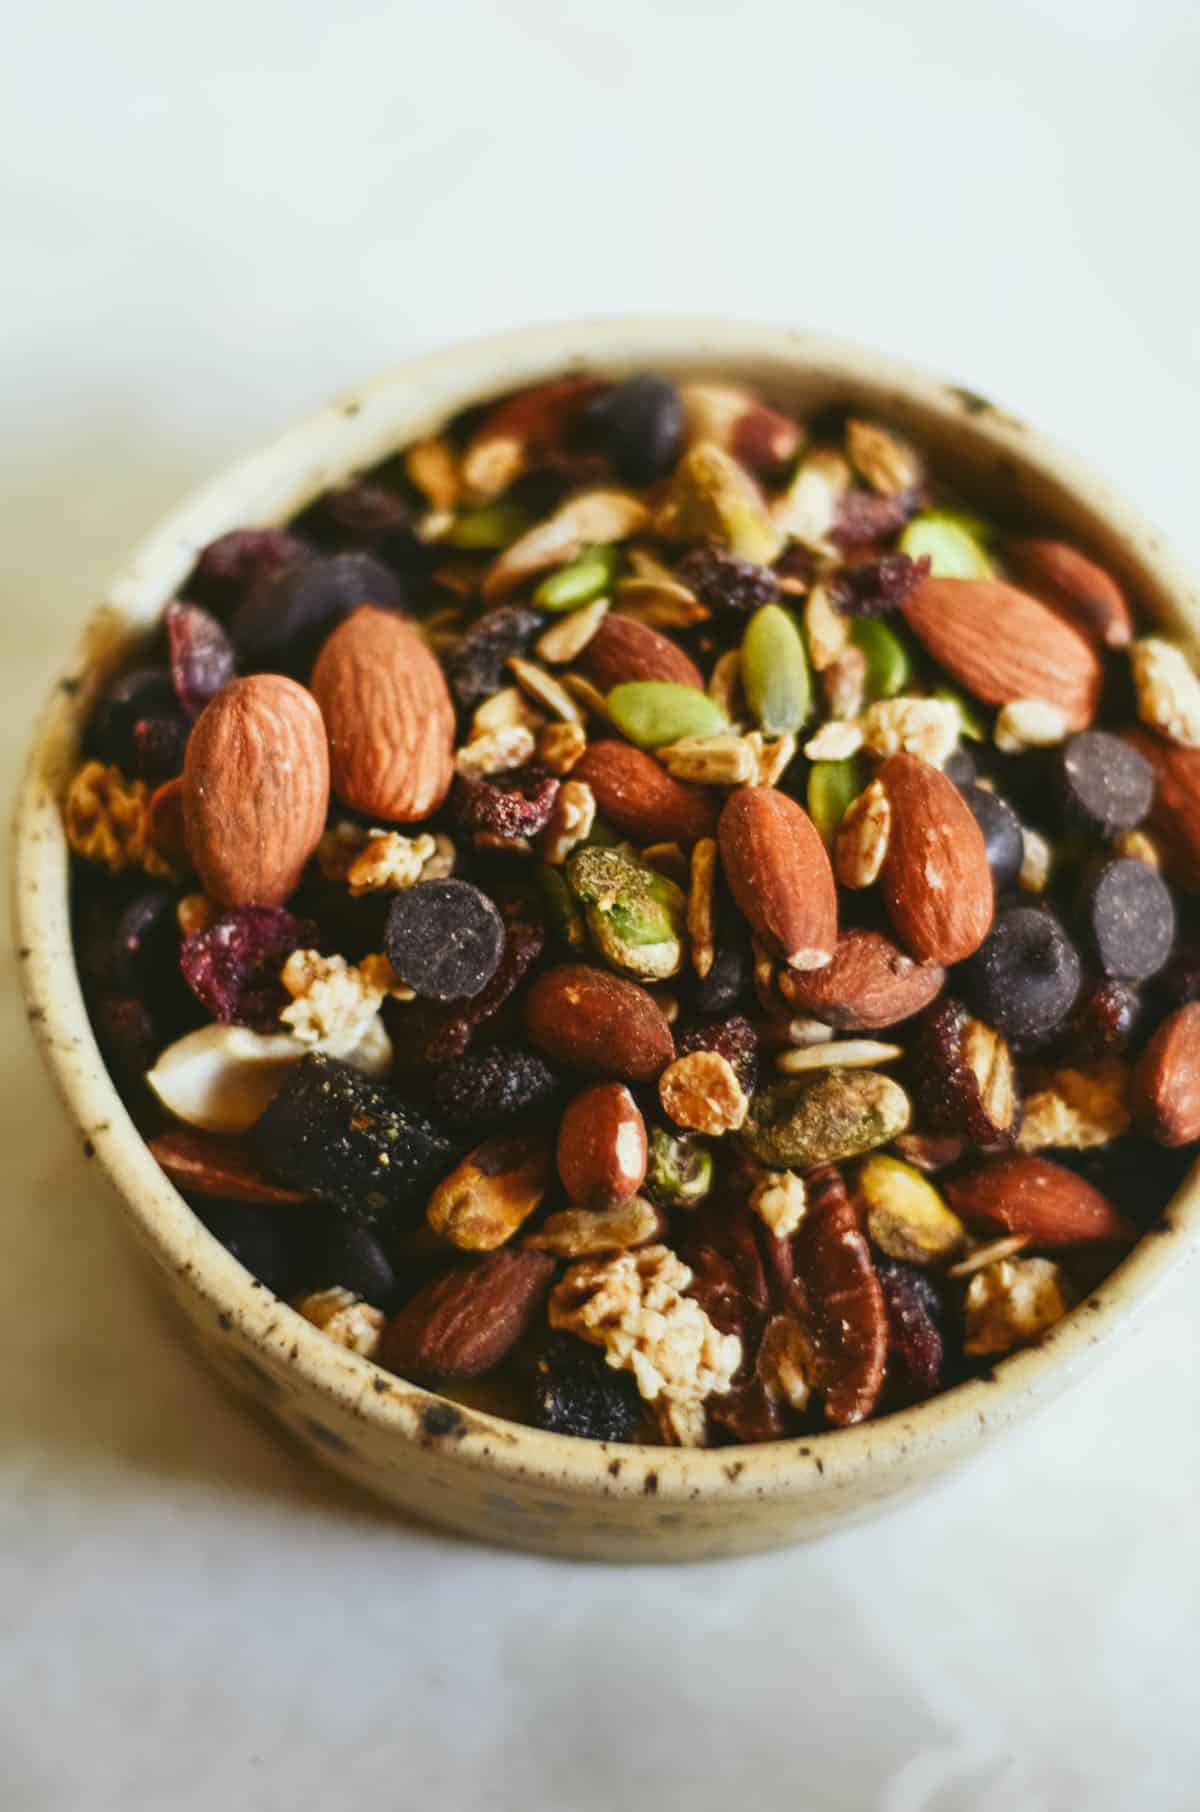 Trail mix with almonds, seeds, dried fruit, chocolate, for hiking.